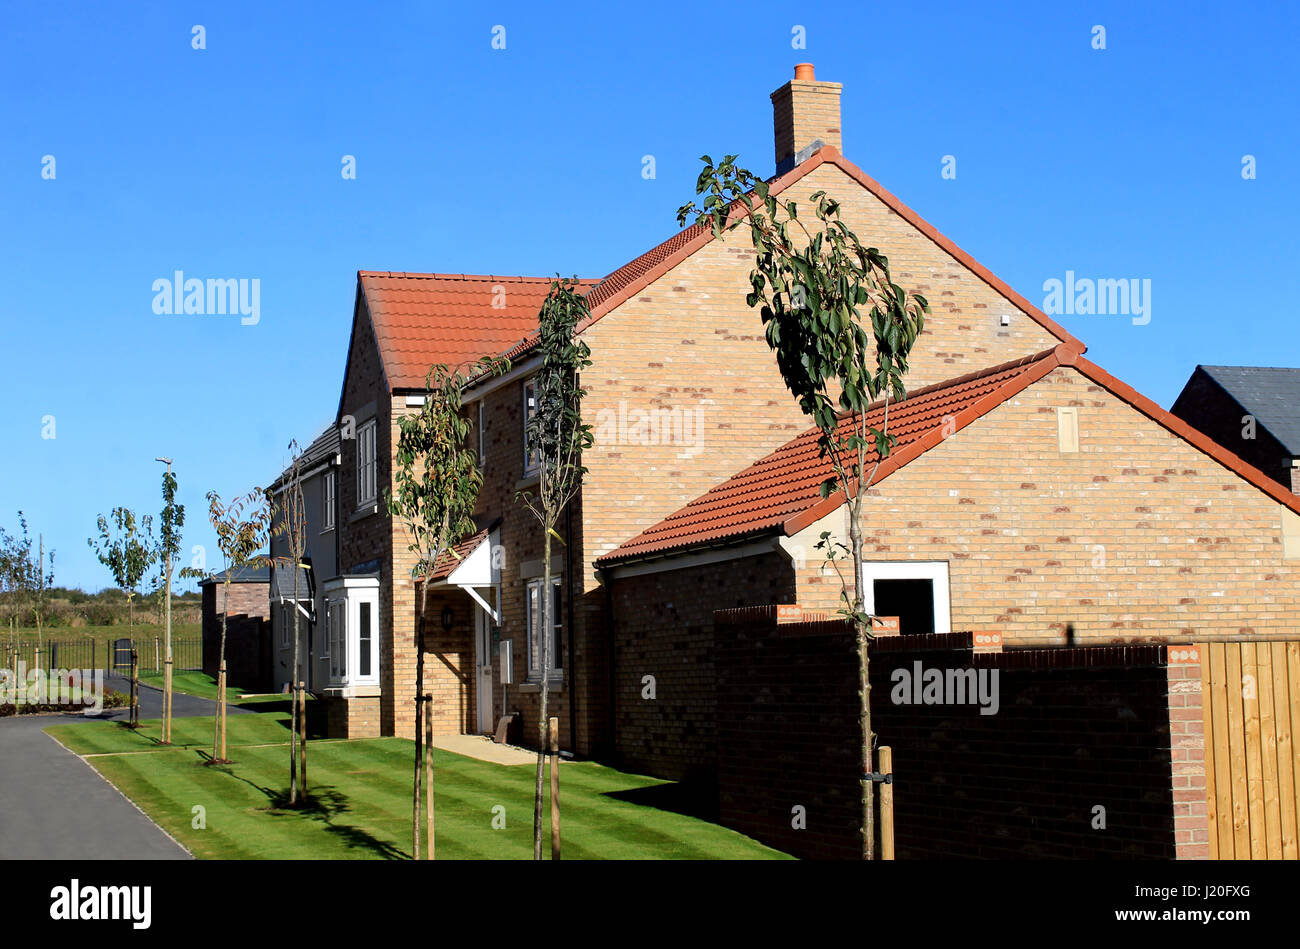 EASTFIELD, SCARBOROUGH, NORTH YORKSHIRE, ENGLAND - 10th of October 2016: New build housing estate pictureed in Scarborough on 10th October 2016. Exter Stock Photo